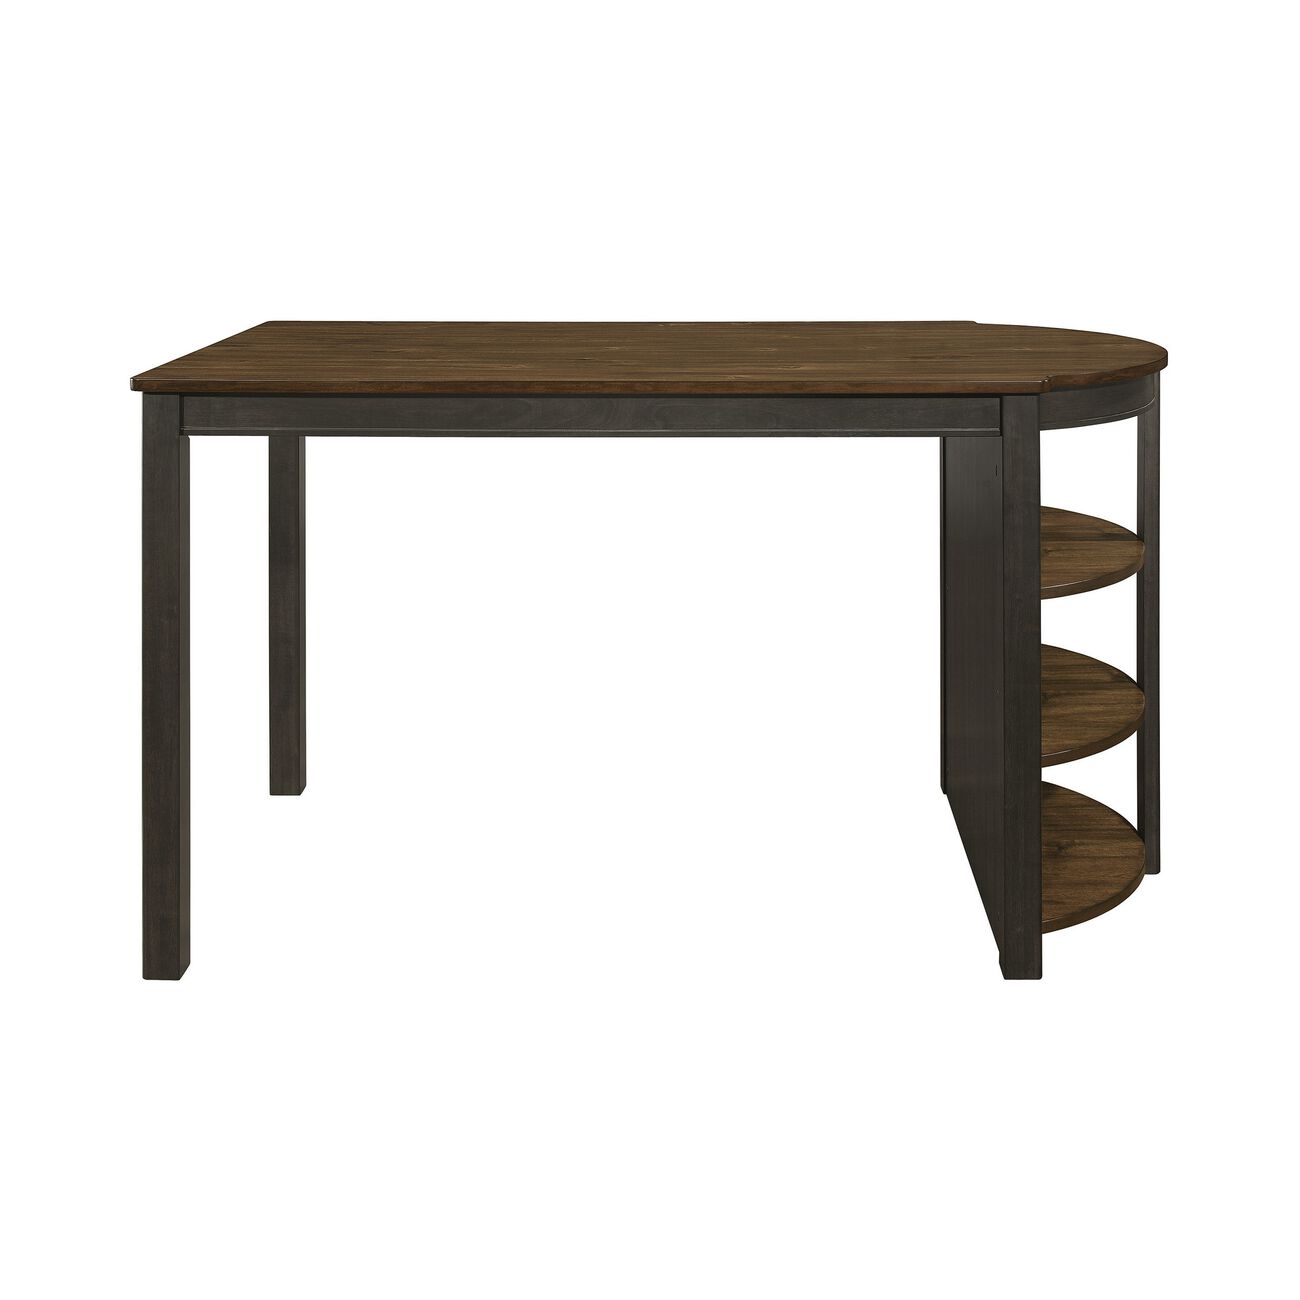 Wooden Counter Height Table with 3 Side Shelves, Brown and Gray